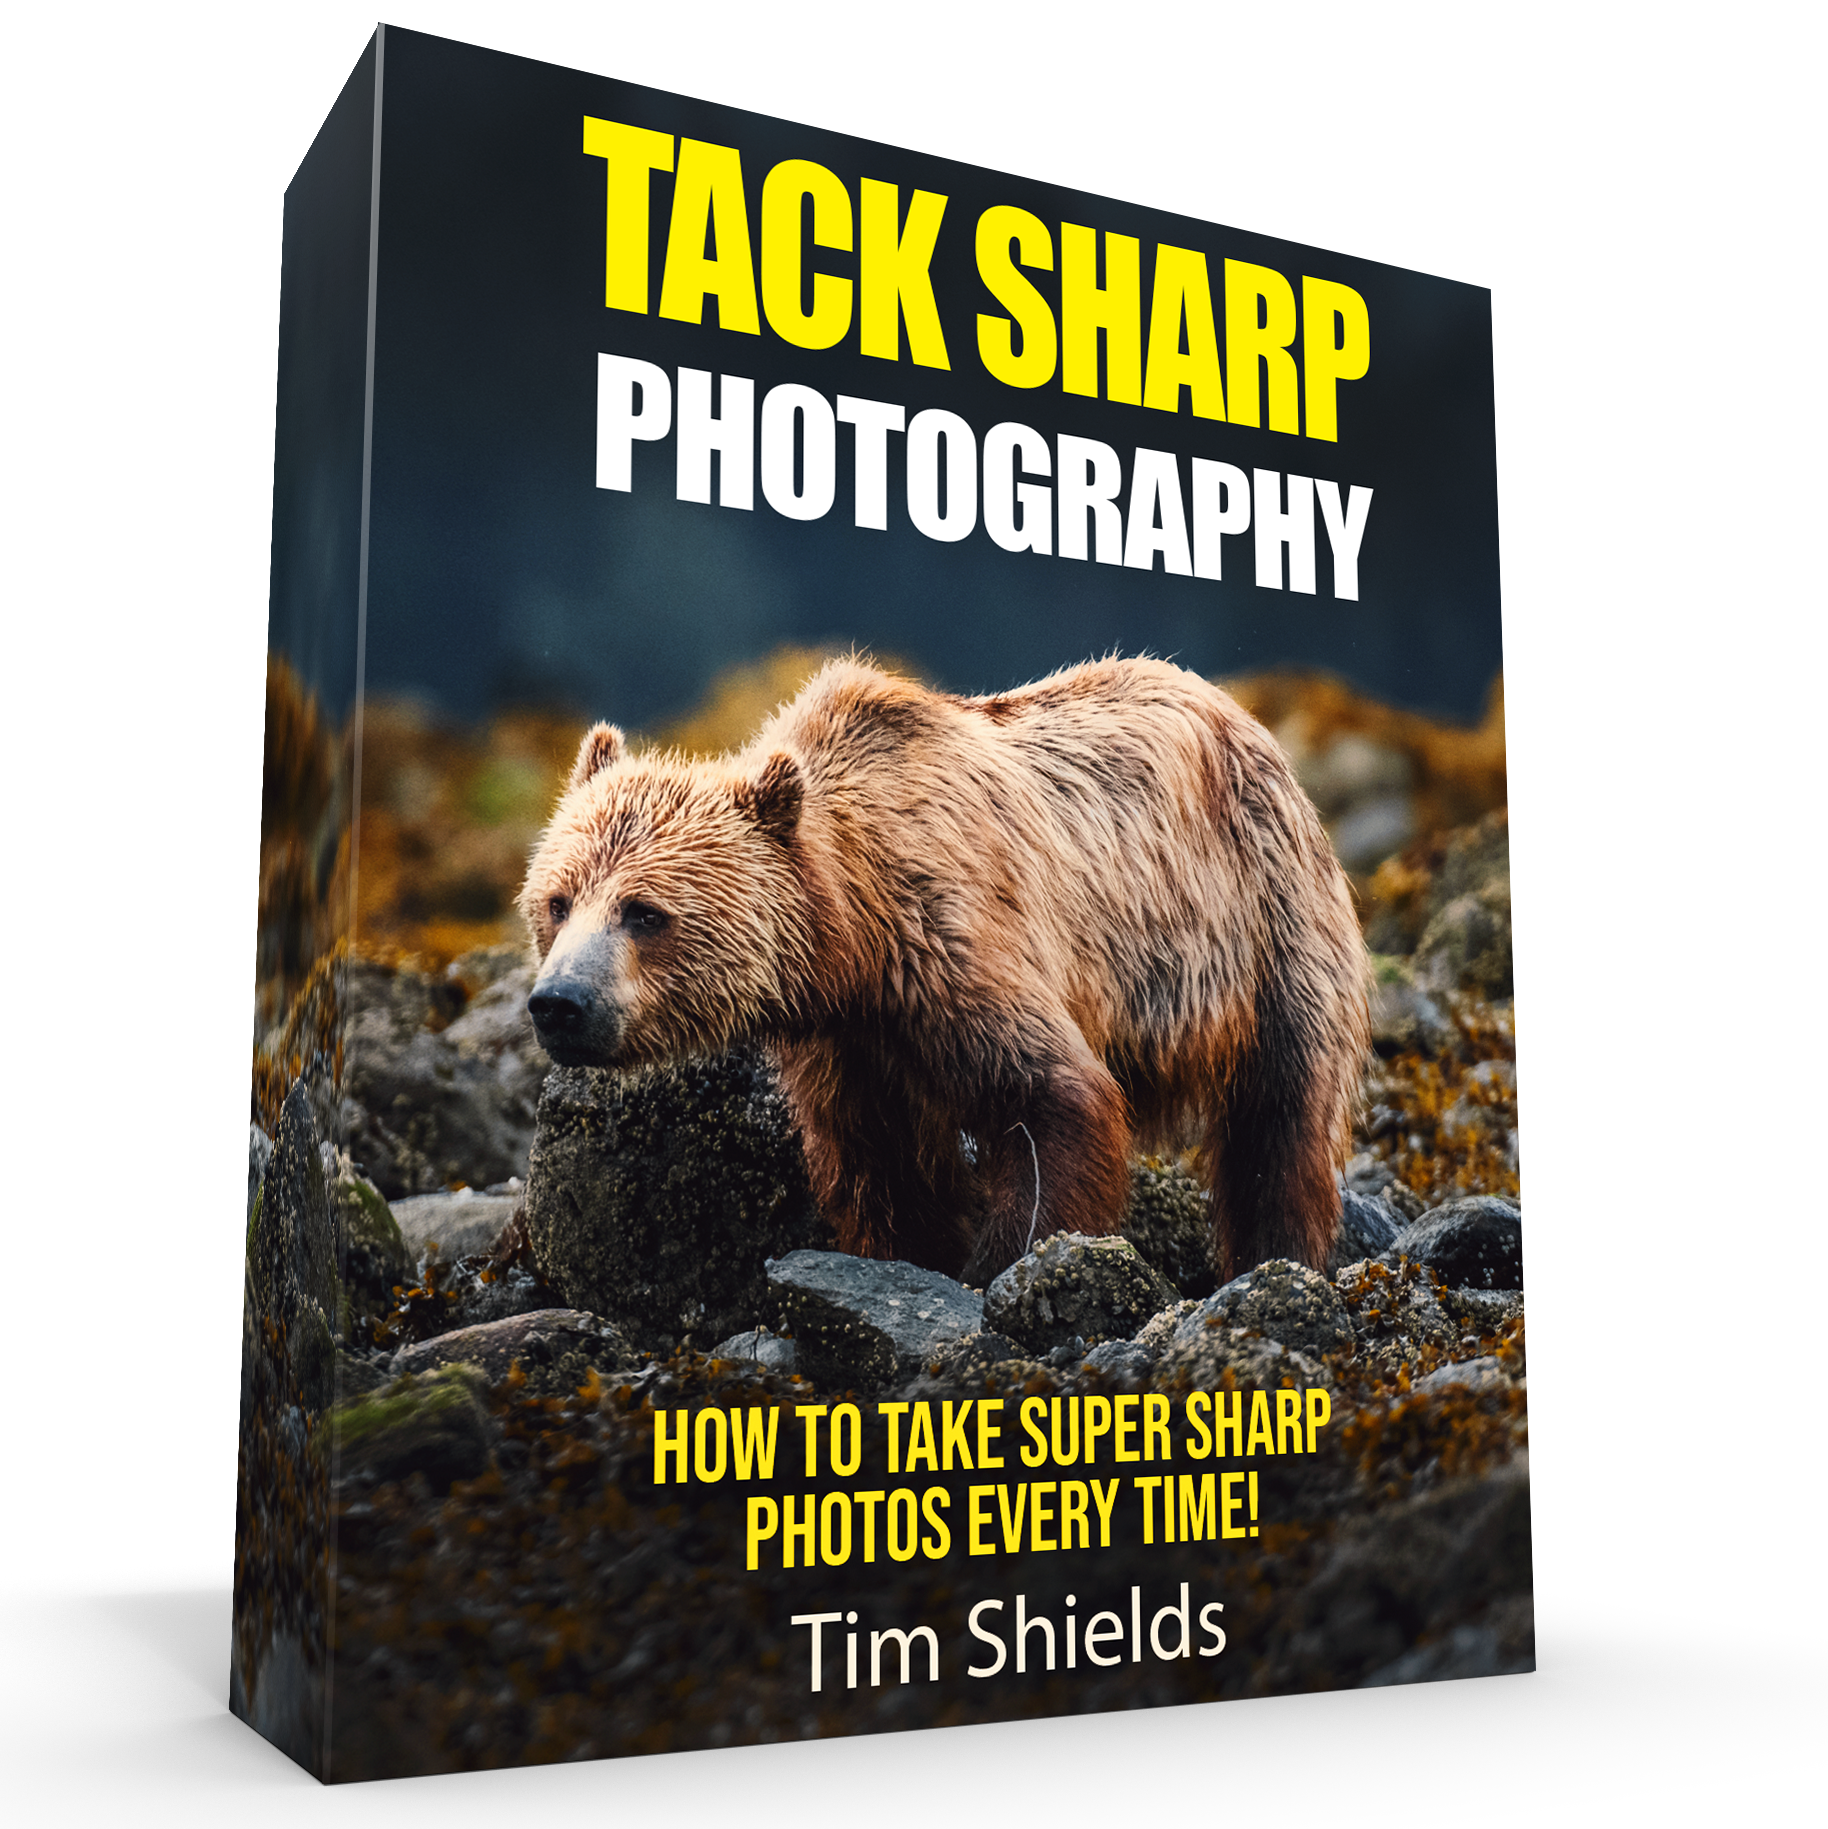 Tack Sharp Photography by Tim Shields